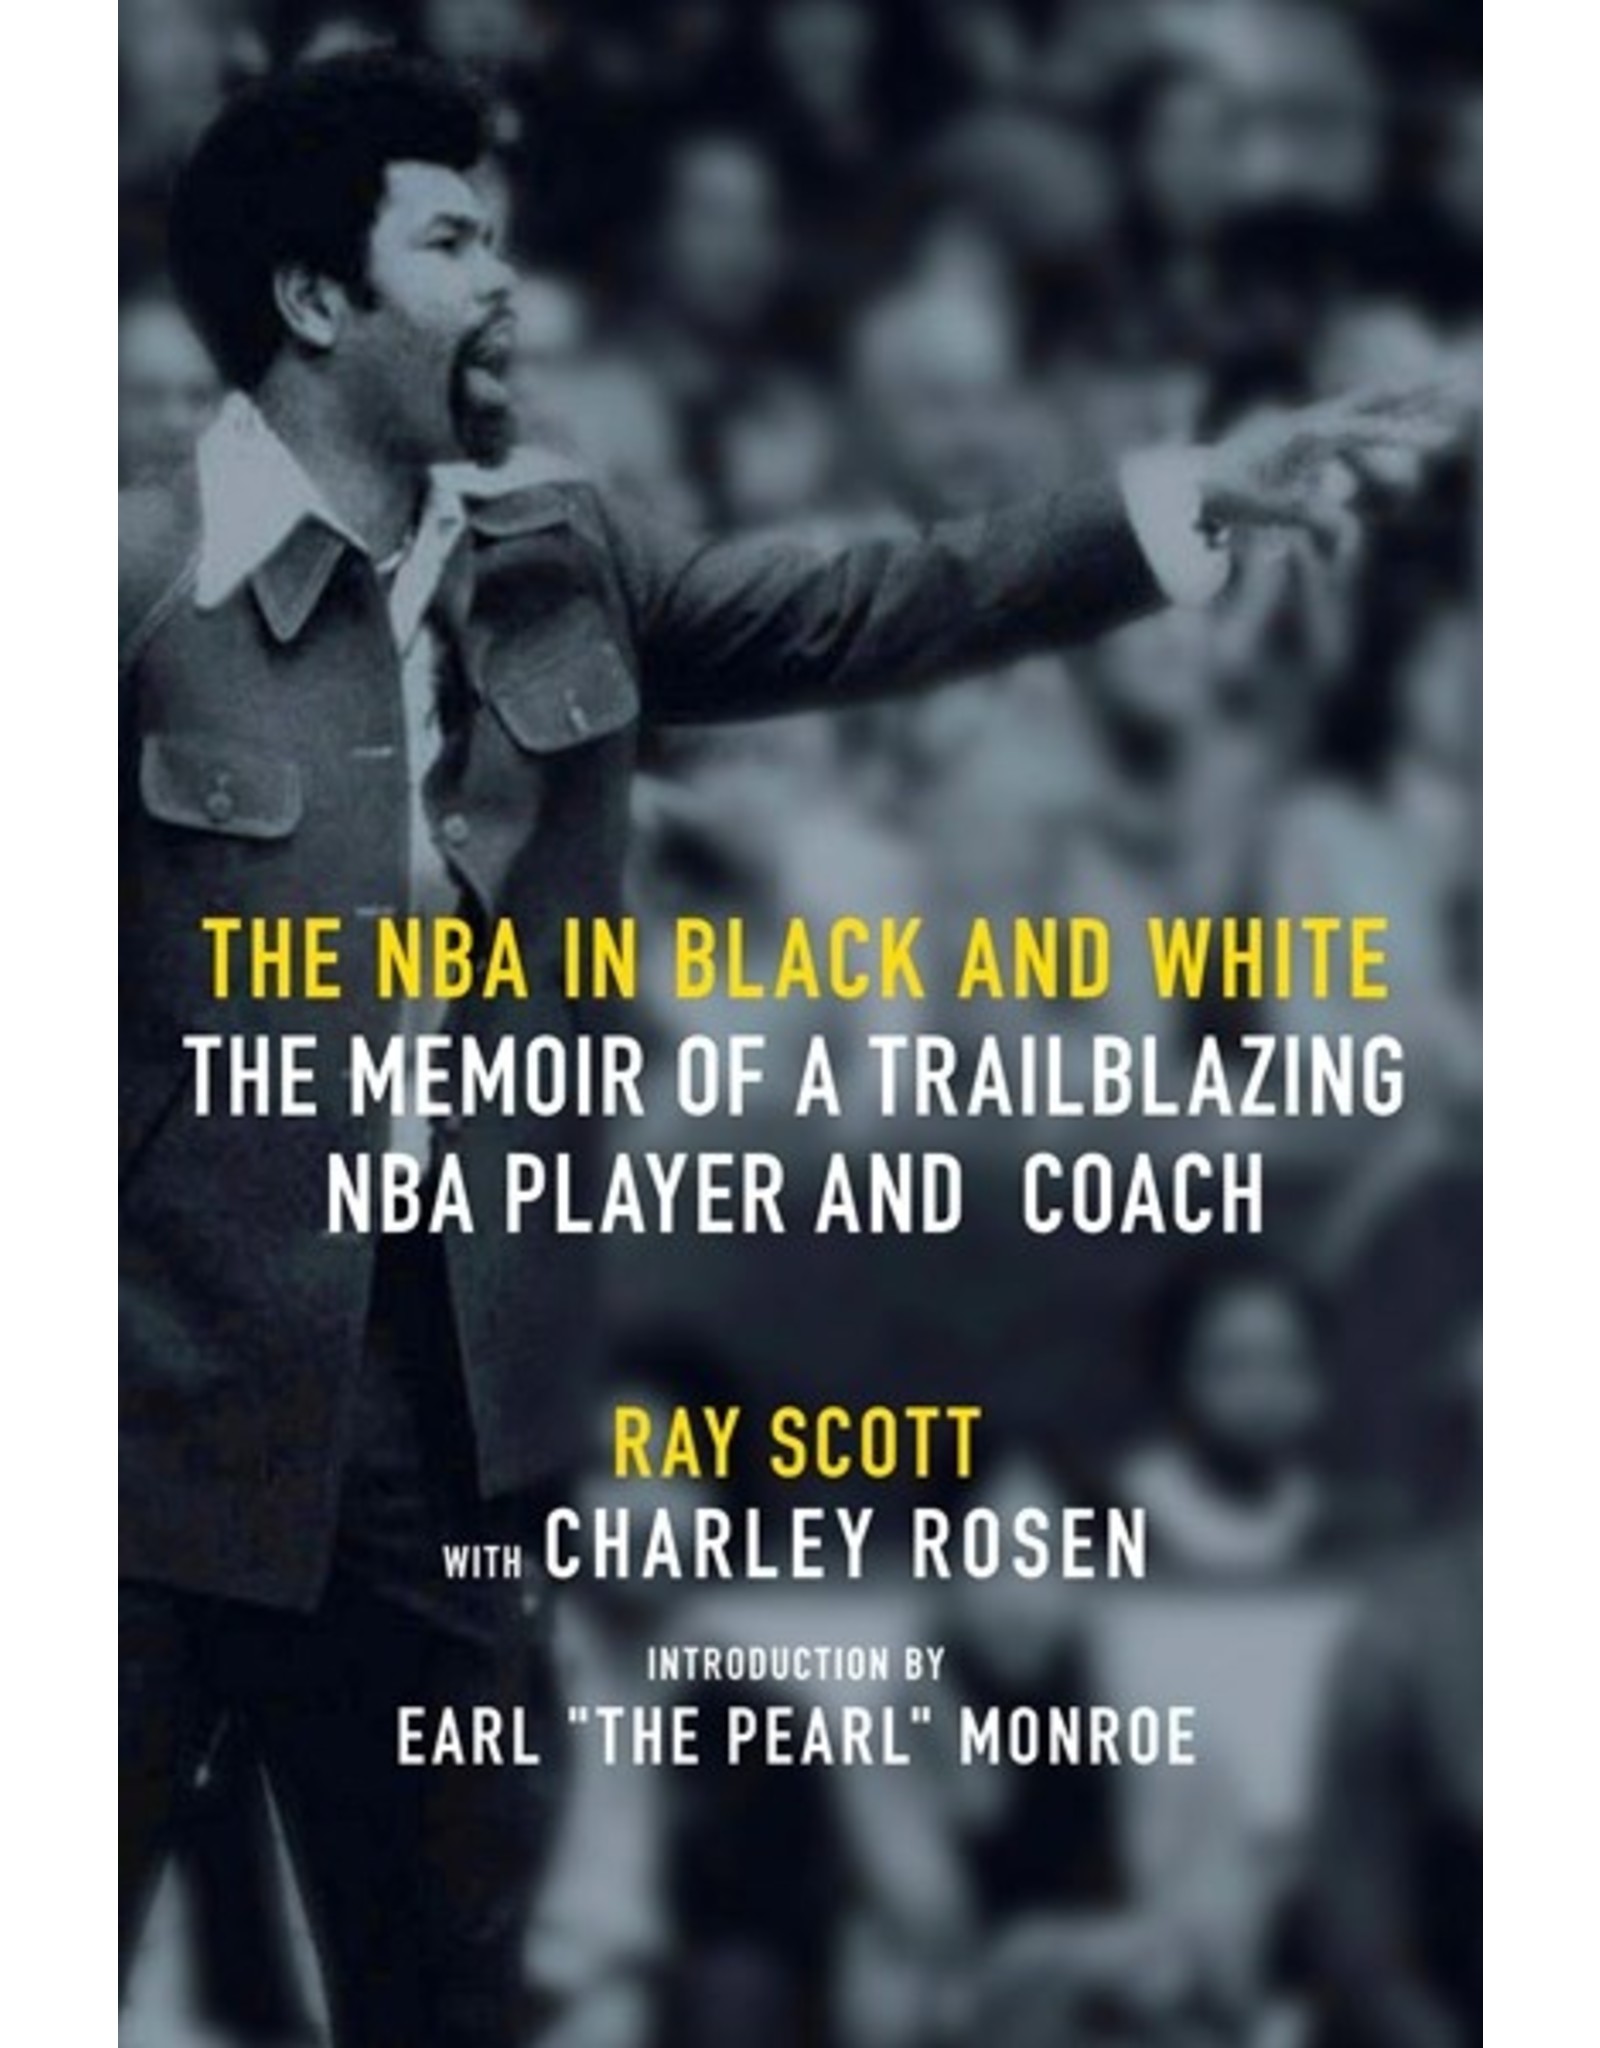 Books The NBA in Black and White : The Memoir of a Trailblazing NBA Player and Coach by Ray Scott with Charley Rosen  Intro by Earl "The Pearl" Monroe (Signed Copies)